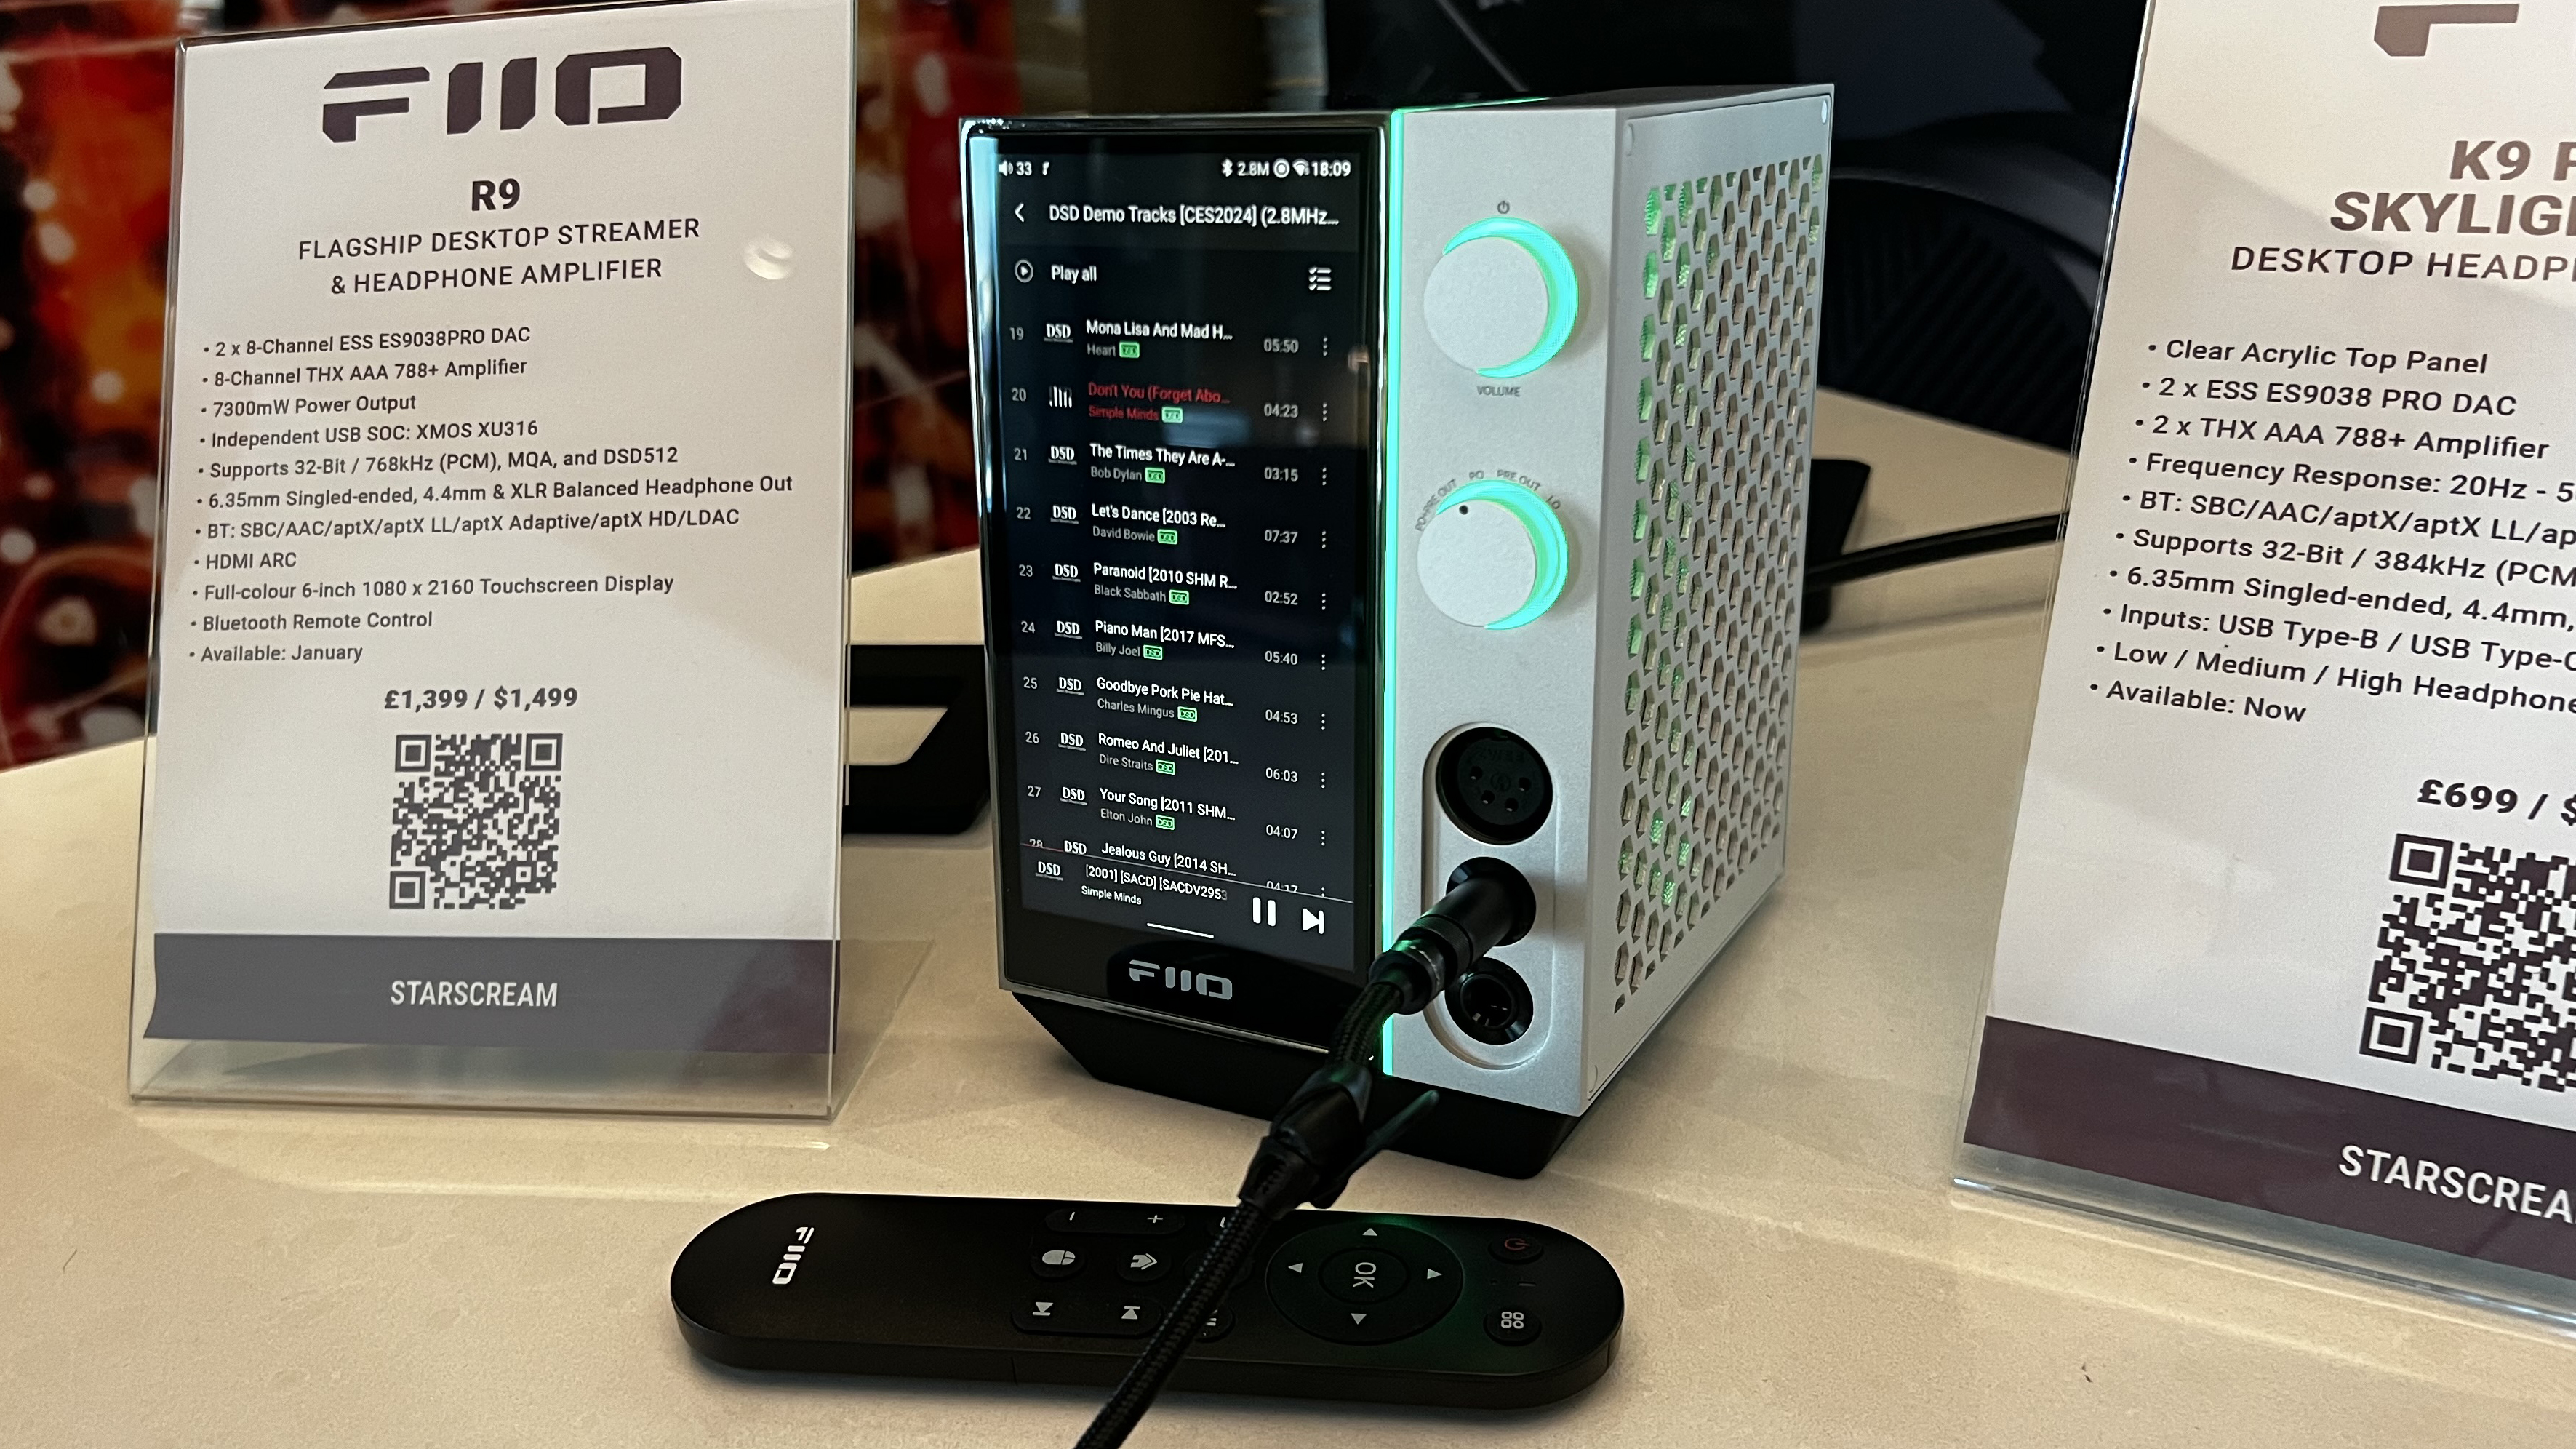 Fiio R9 music player on a wooden table next to a sign listing its features